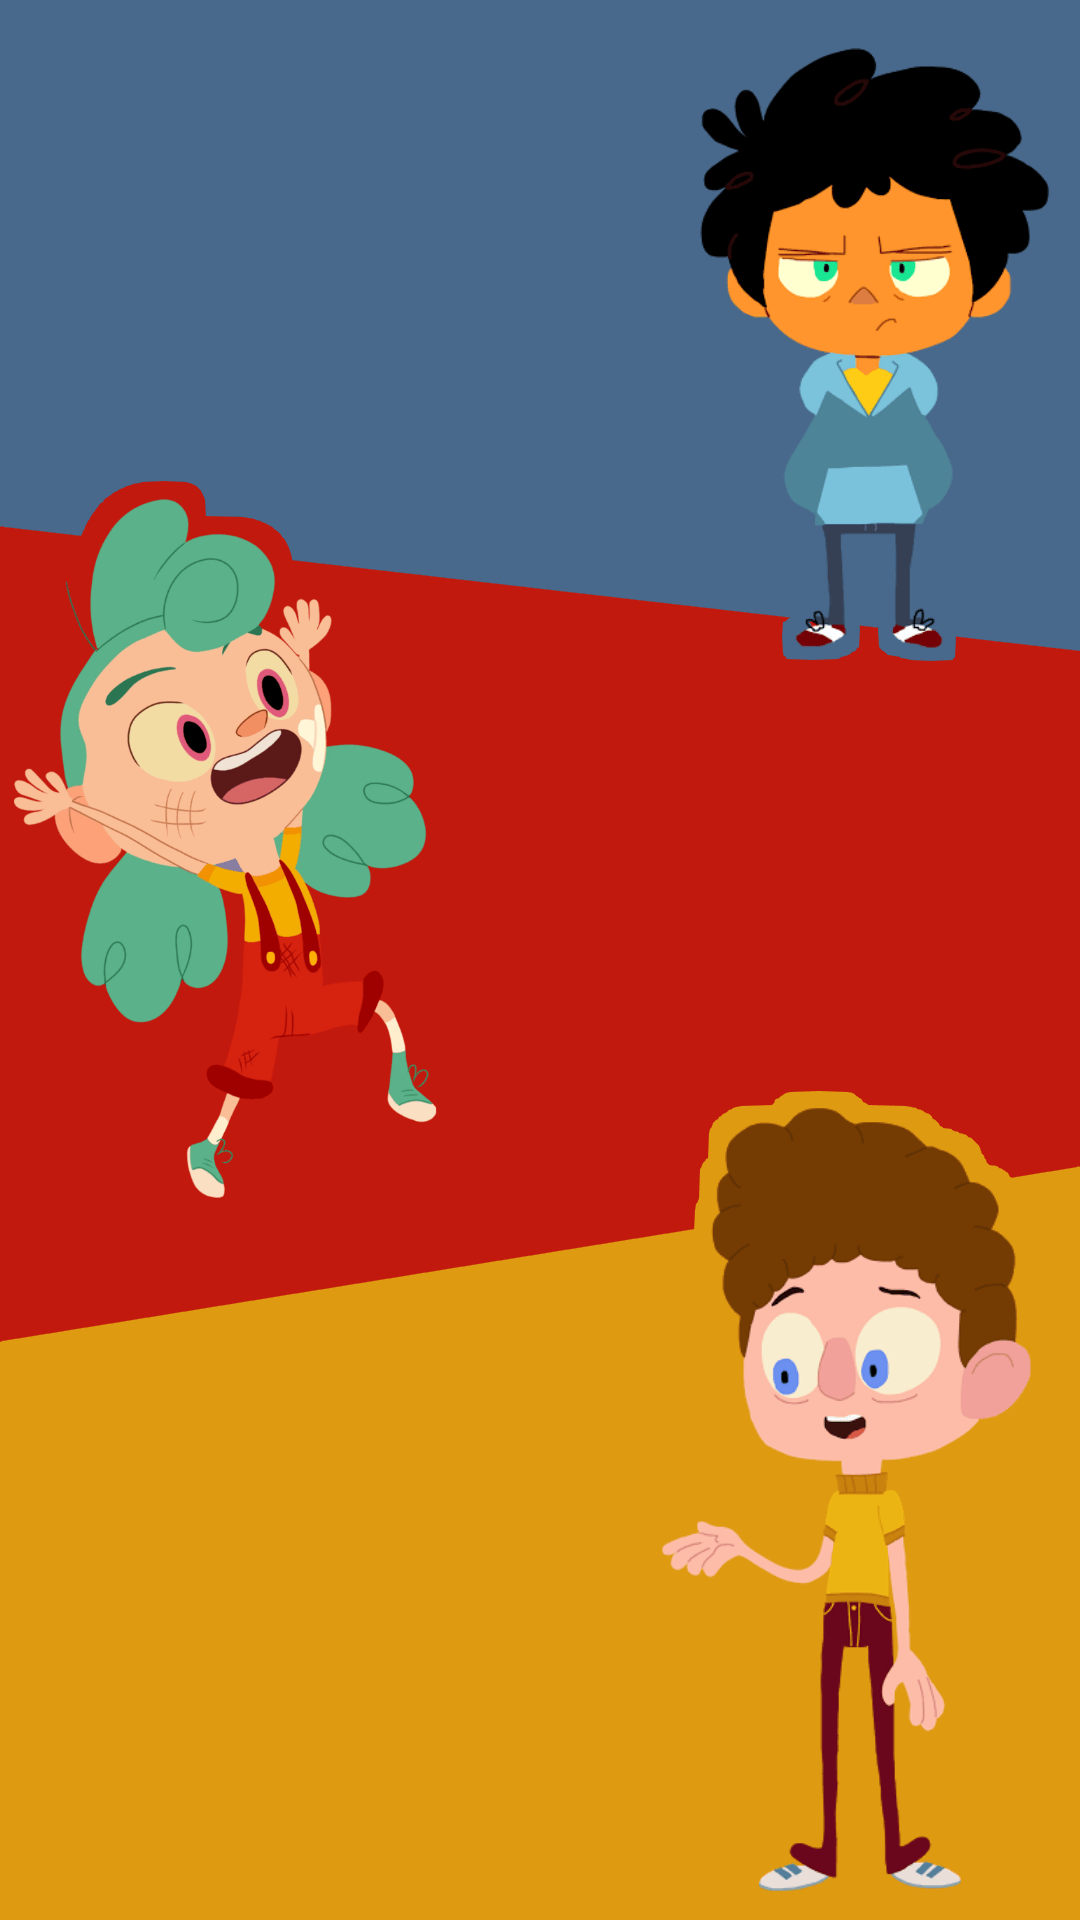 Camp Camp Wallpapers